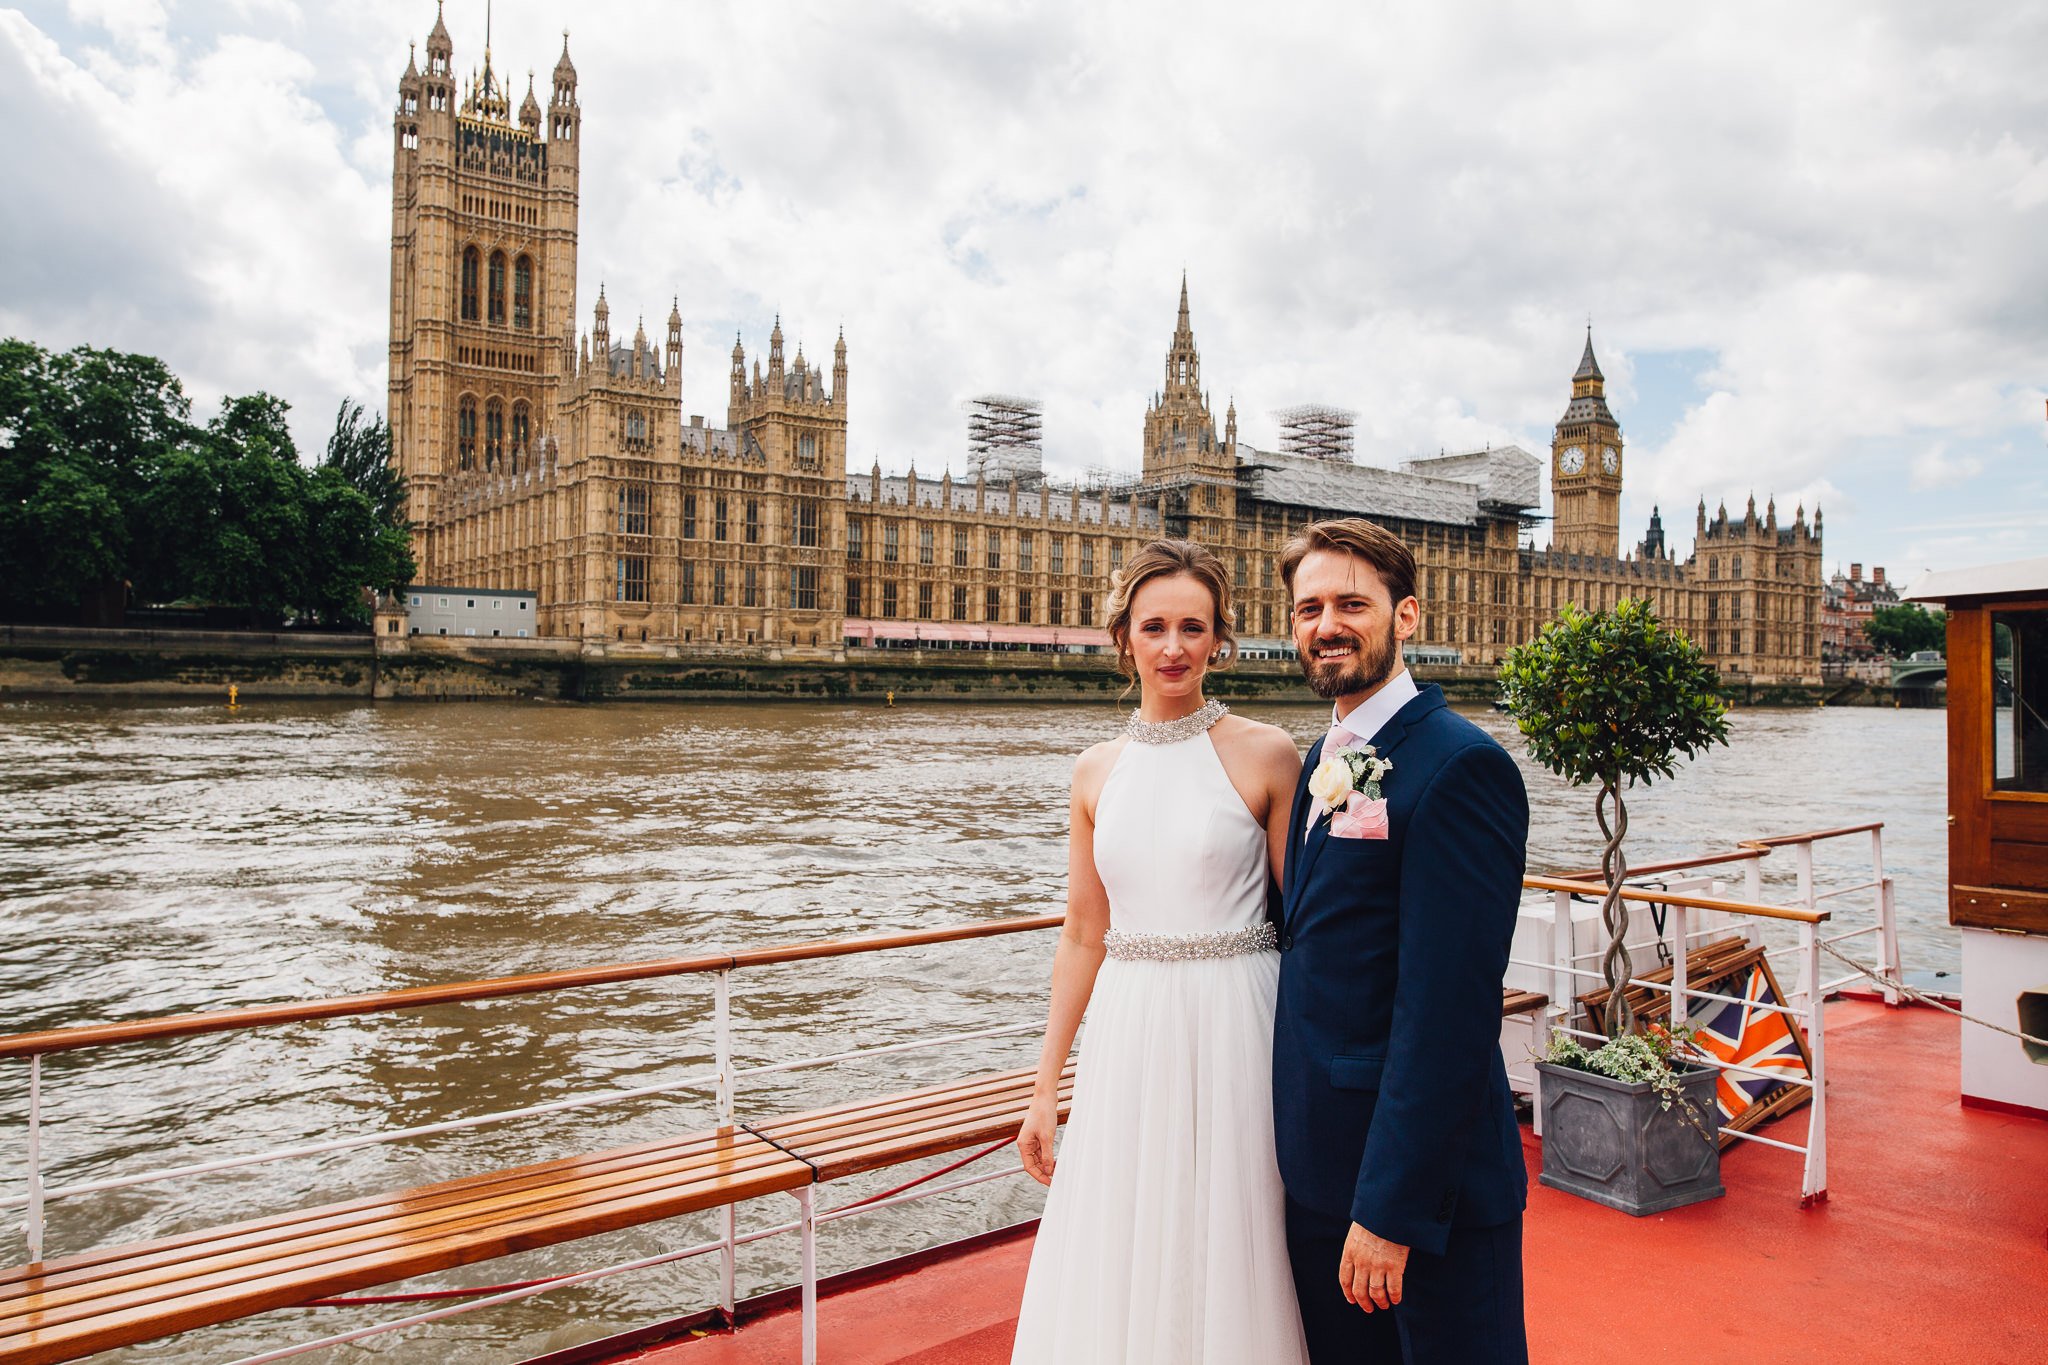  Bride and Groom on a boat on the Thames in front of the Houses of Parliament  